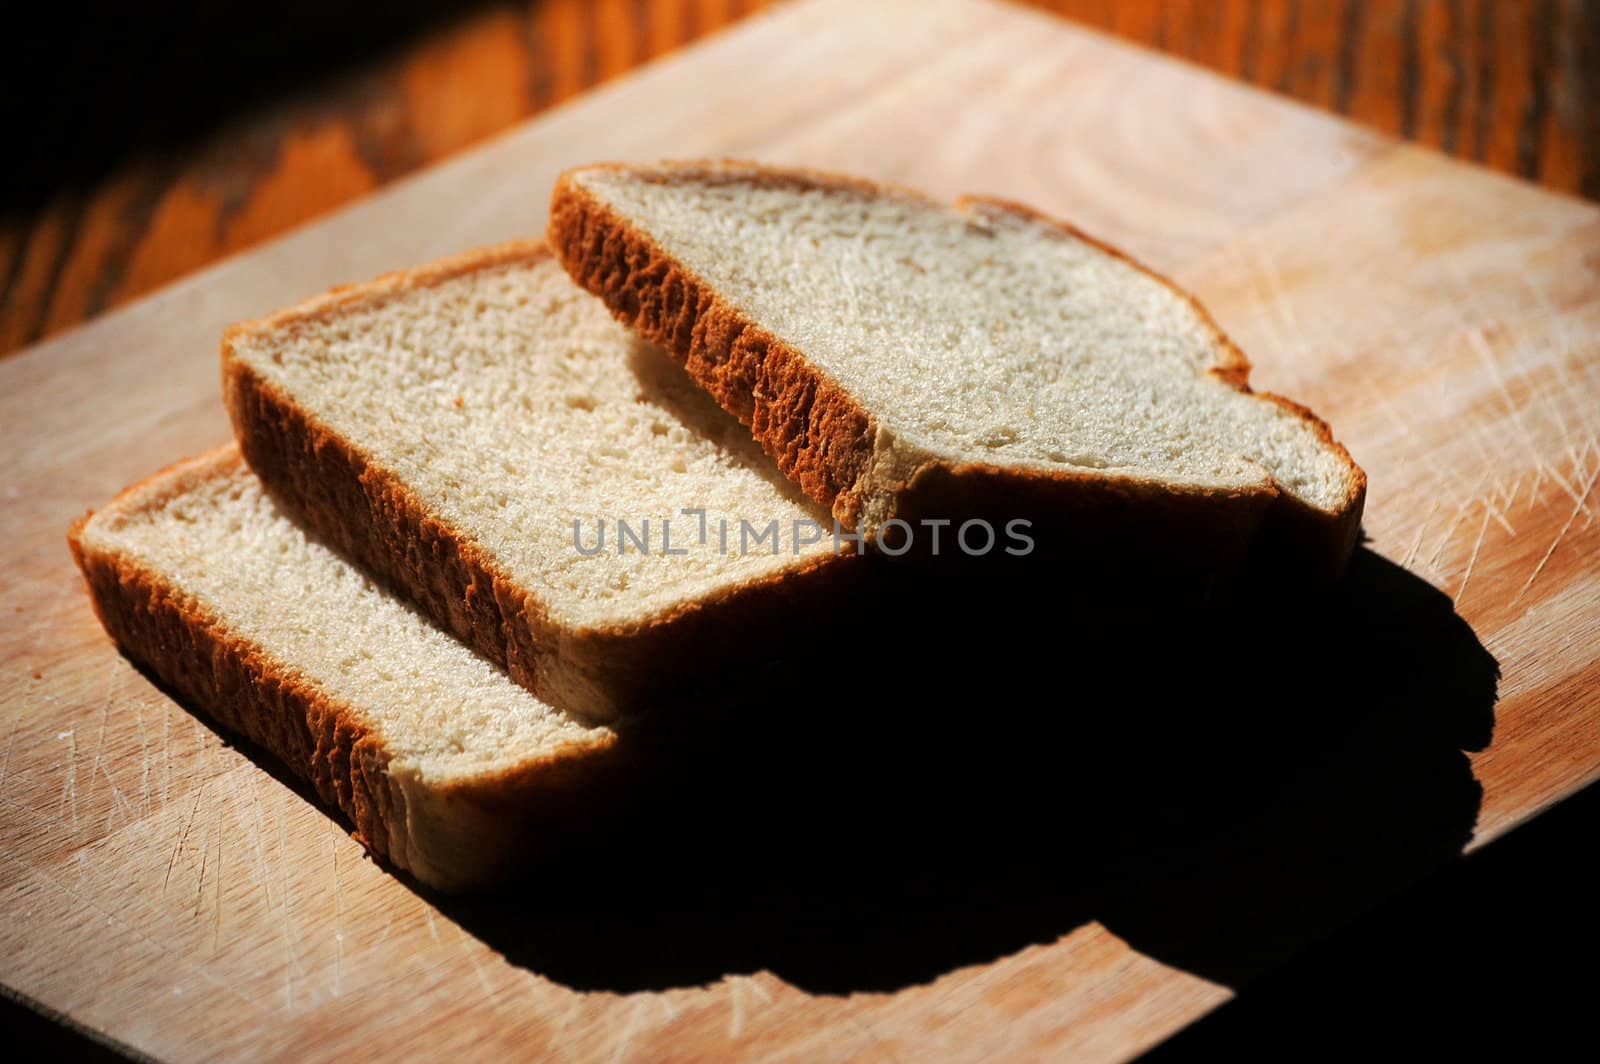 Slices of bread on a cutting board